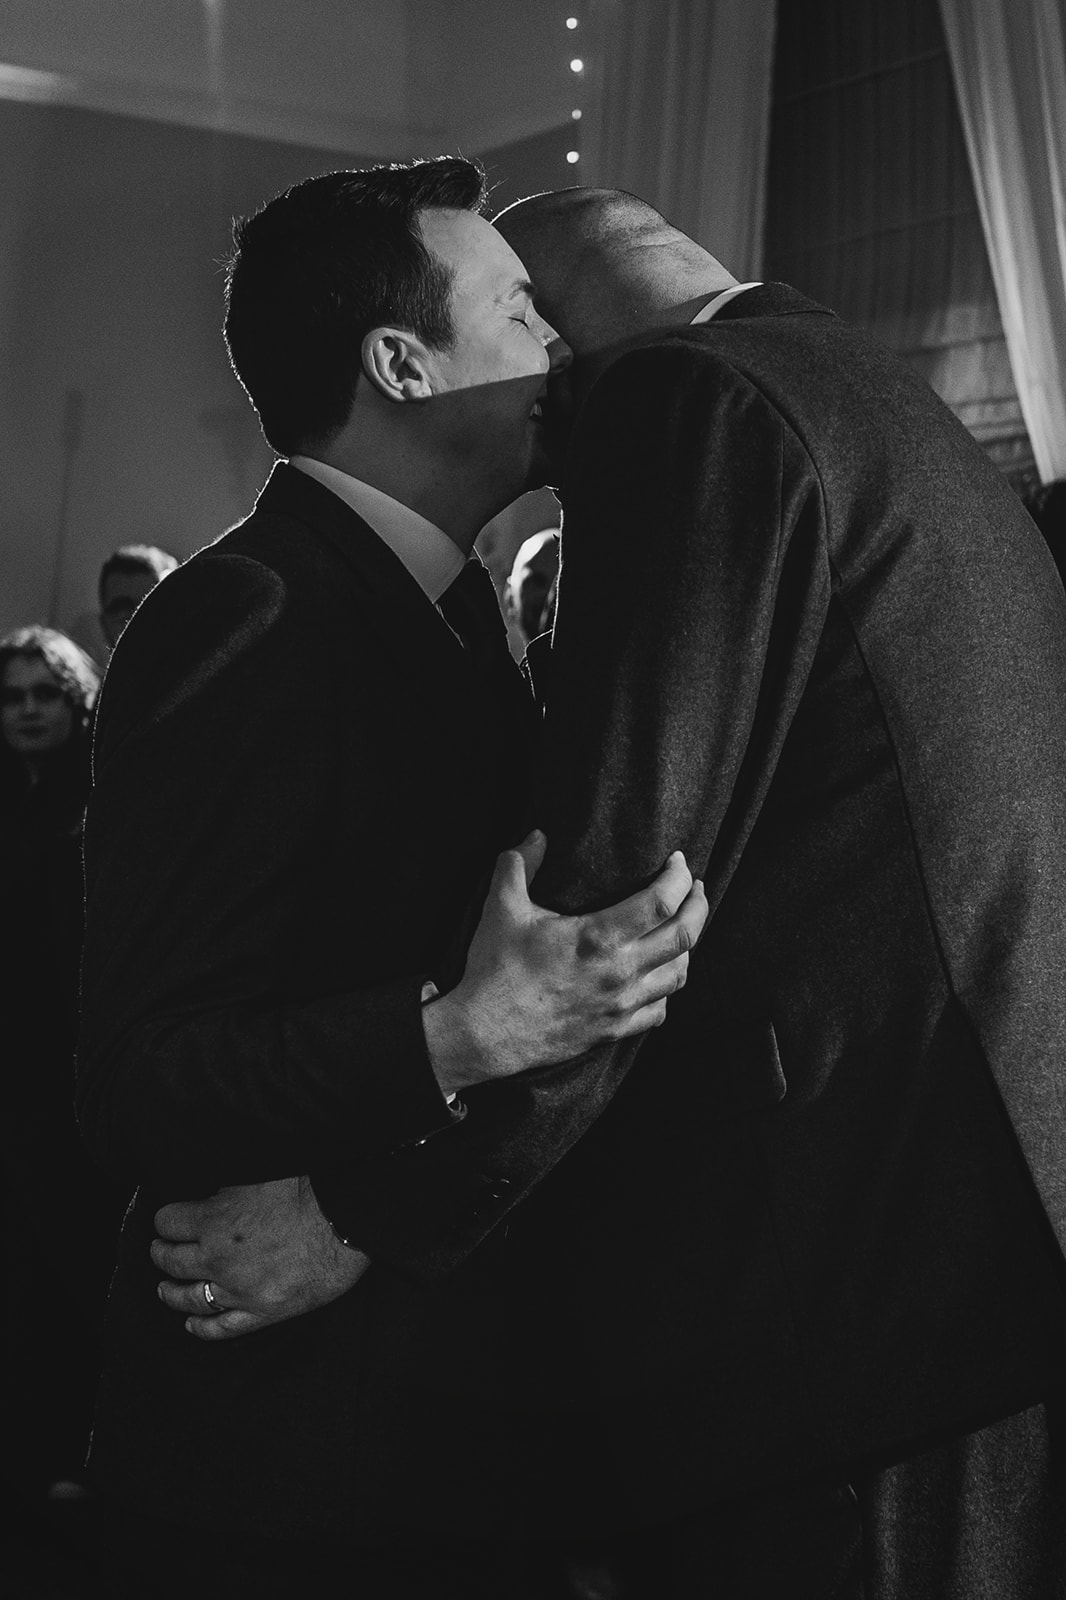 an emotional moment during the first dance as the two grooms hold one another and close their eyes